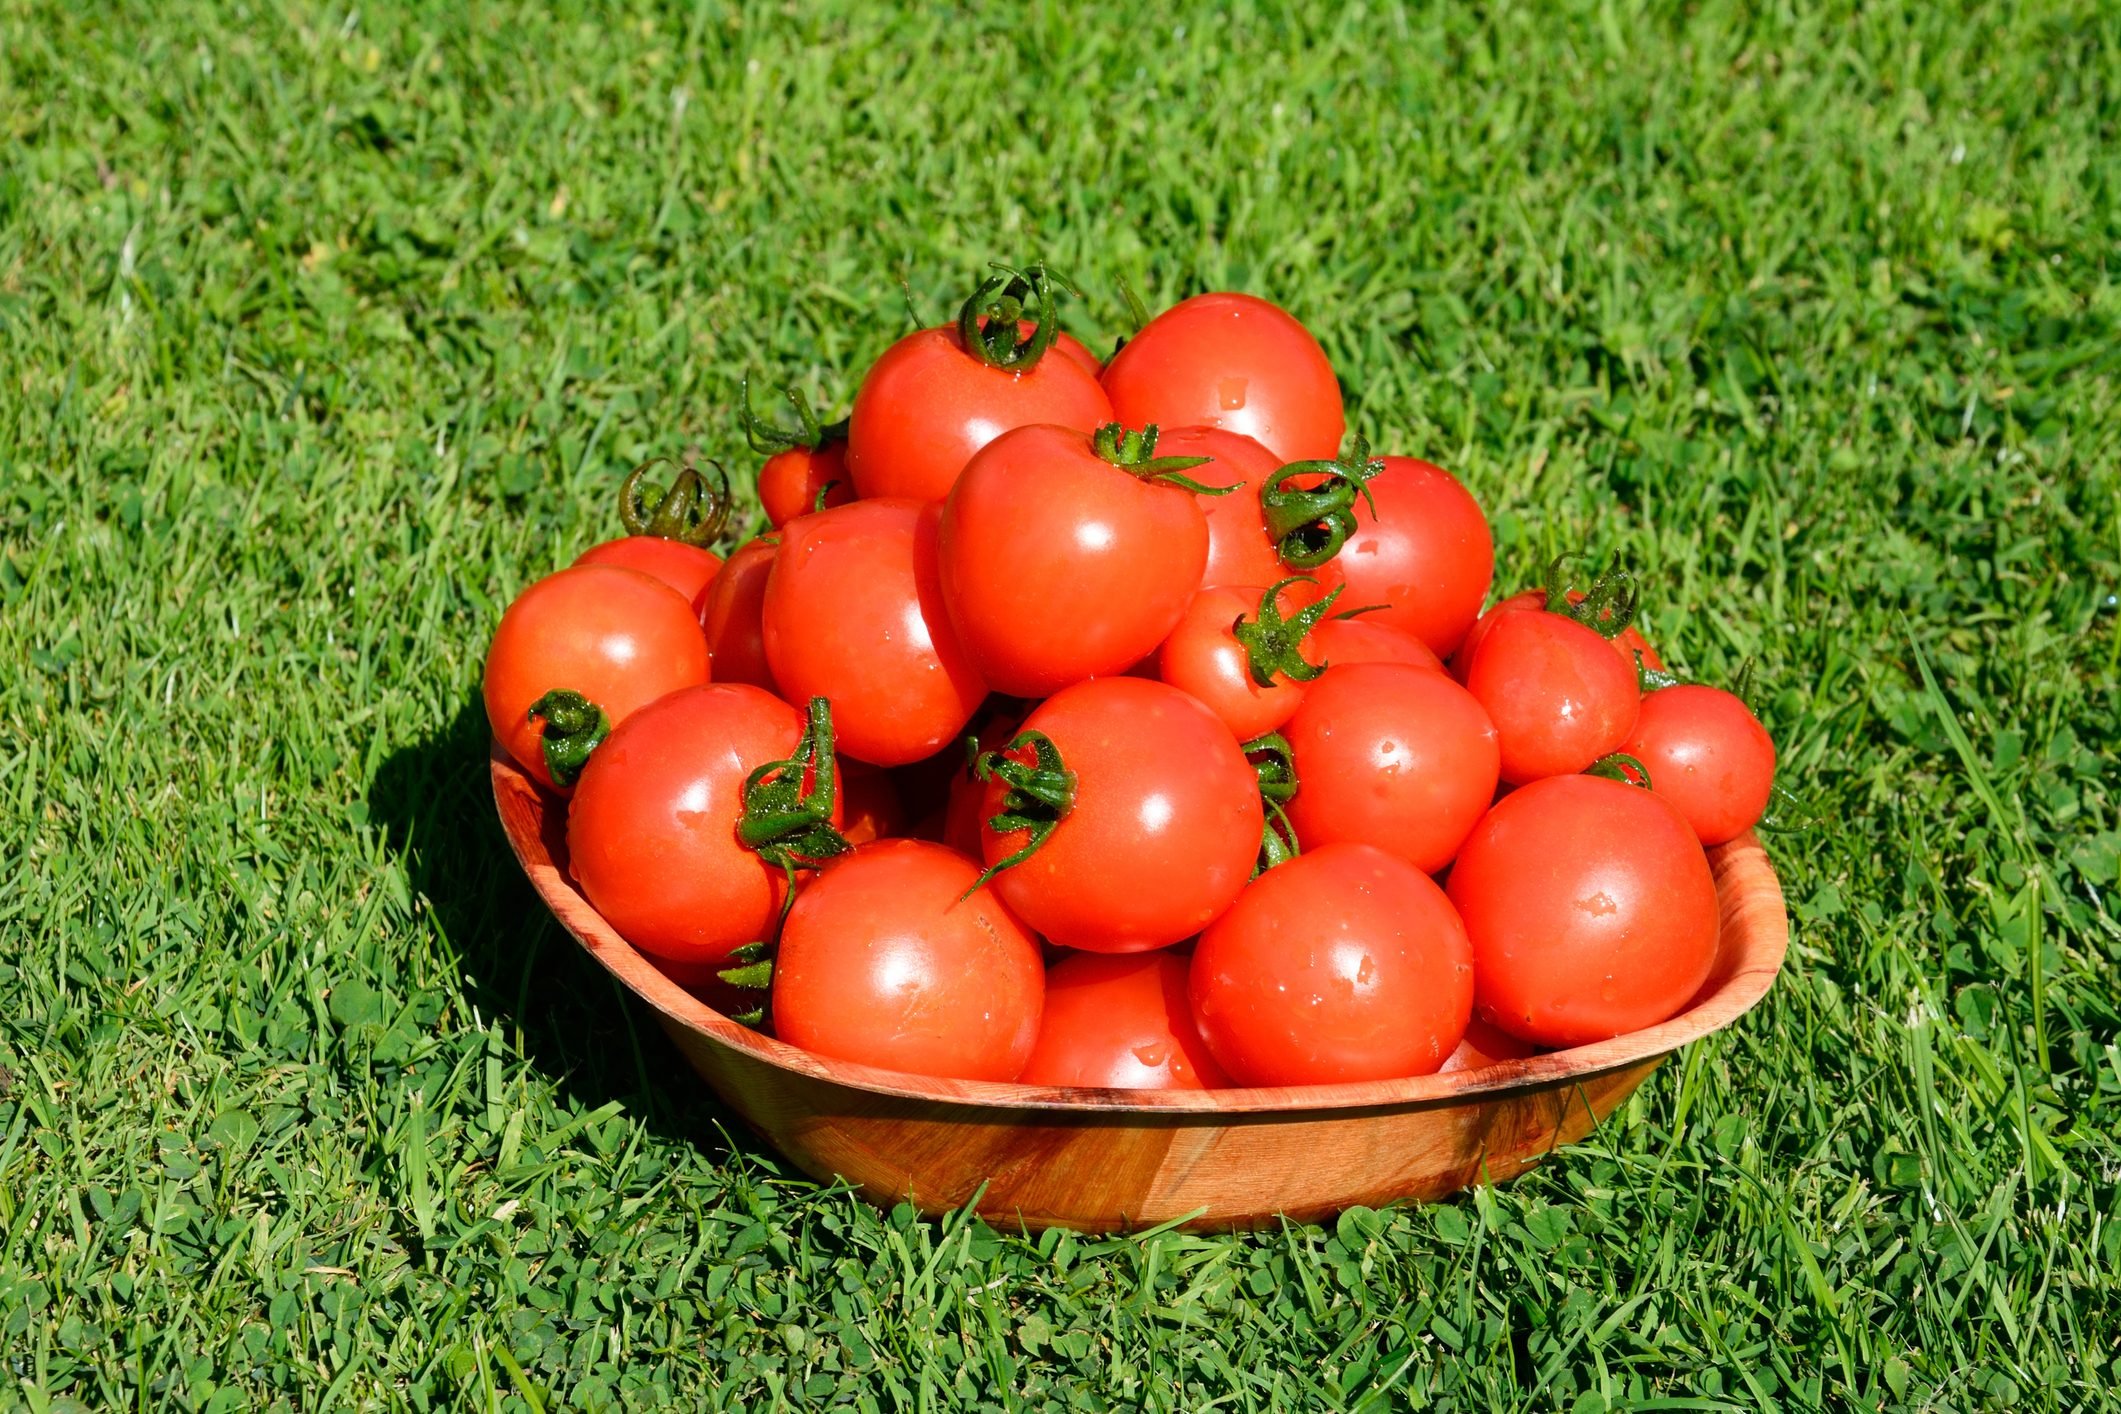 Should You Grow Hybrid or Heirloom Tomatoes?